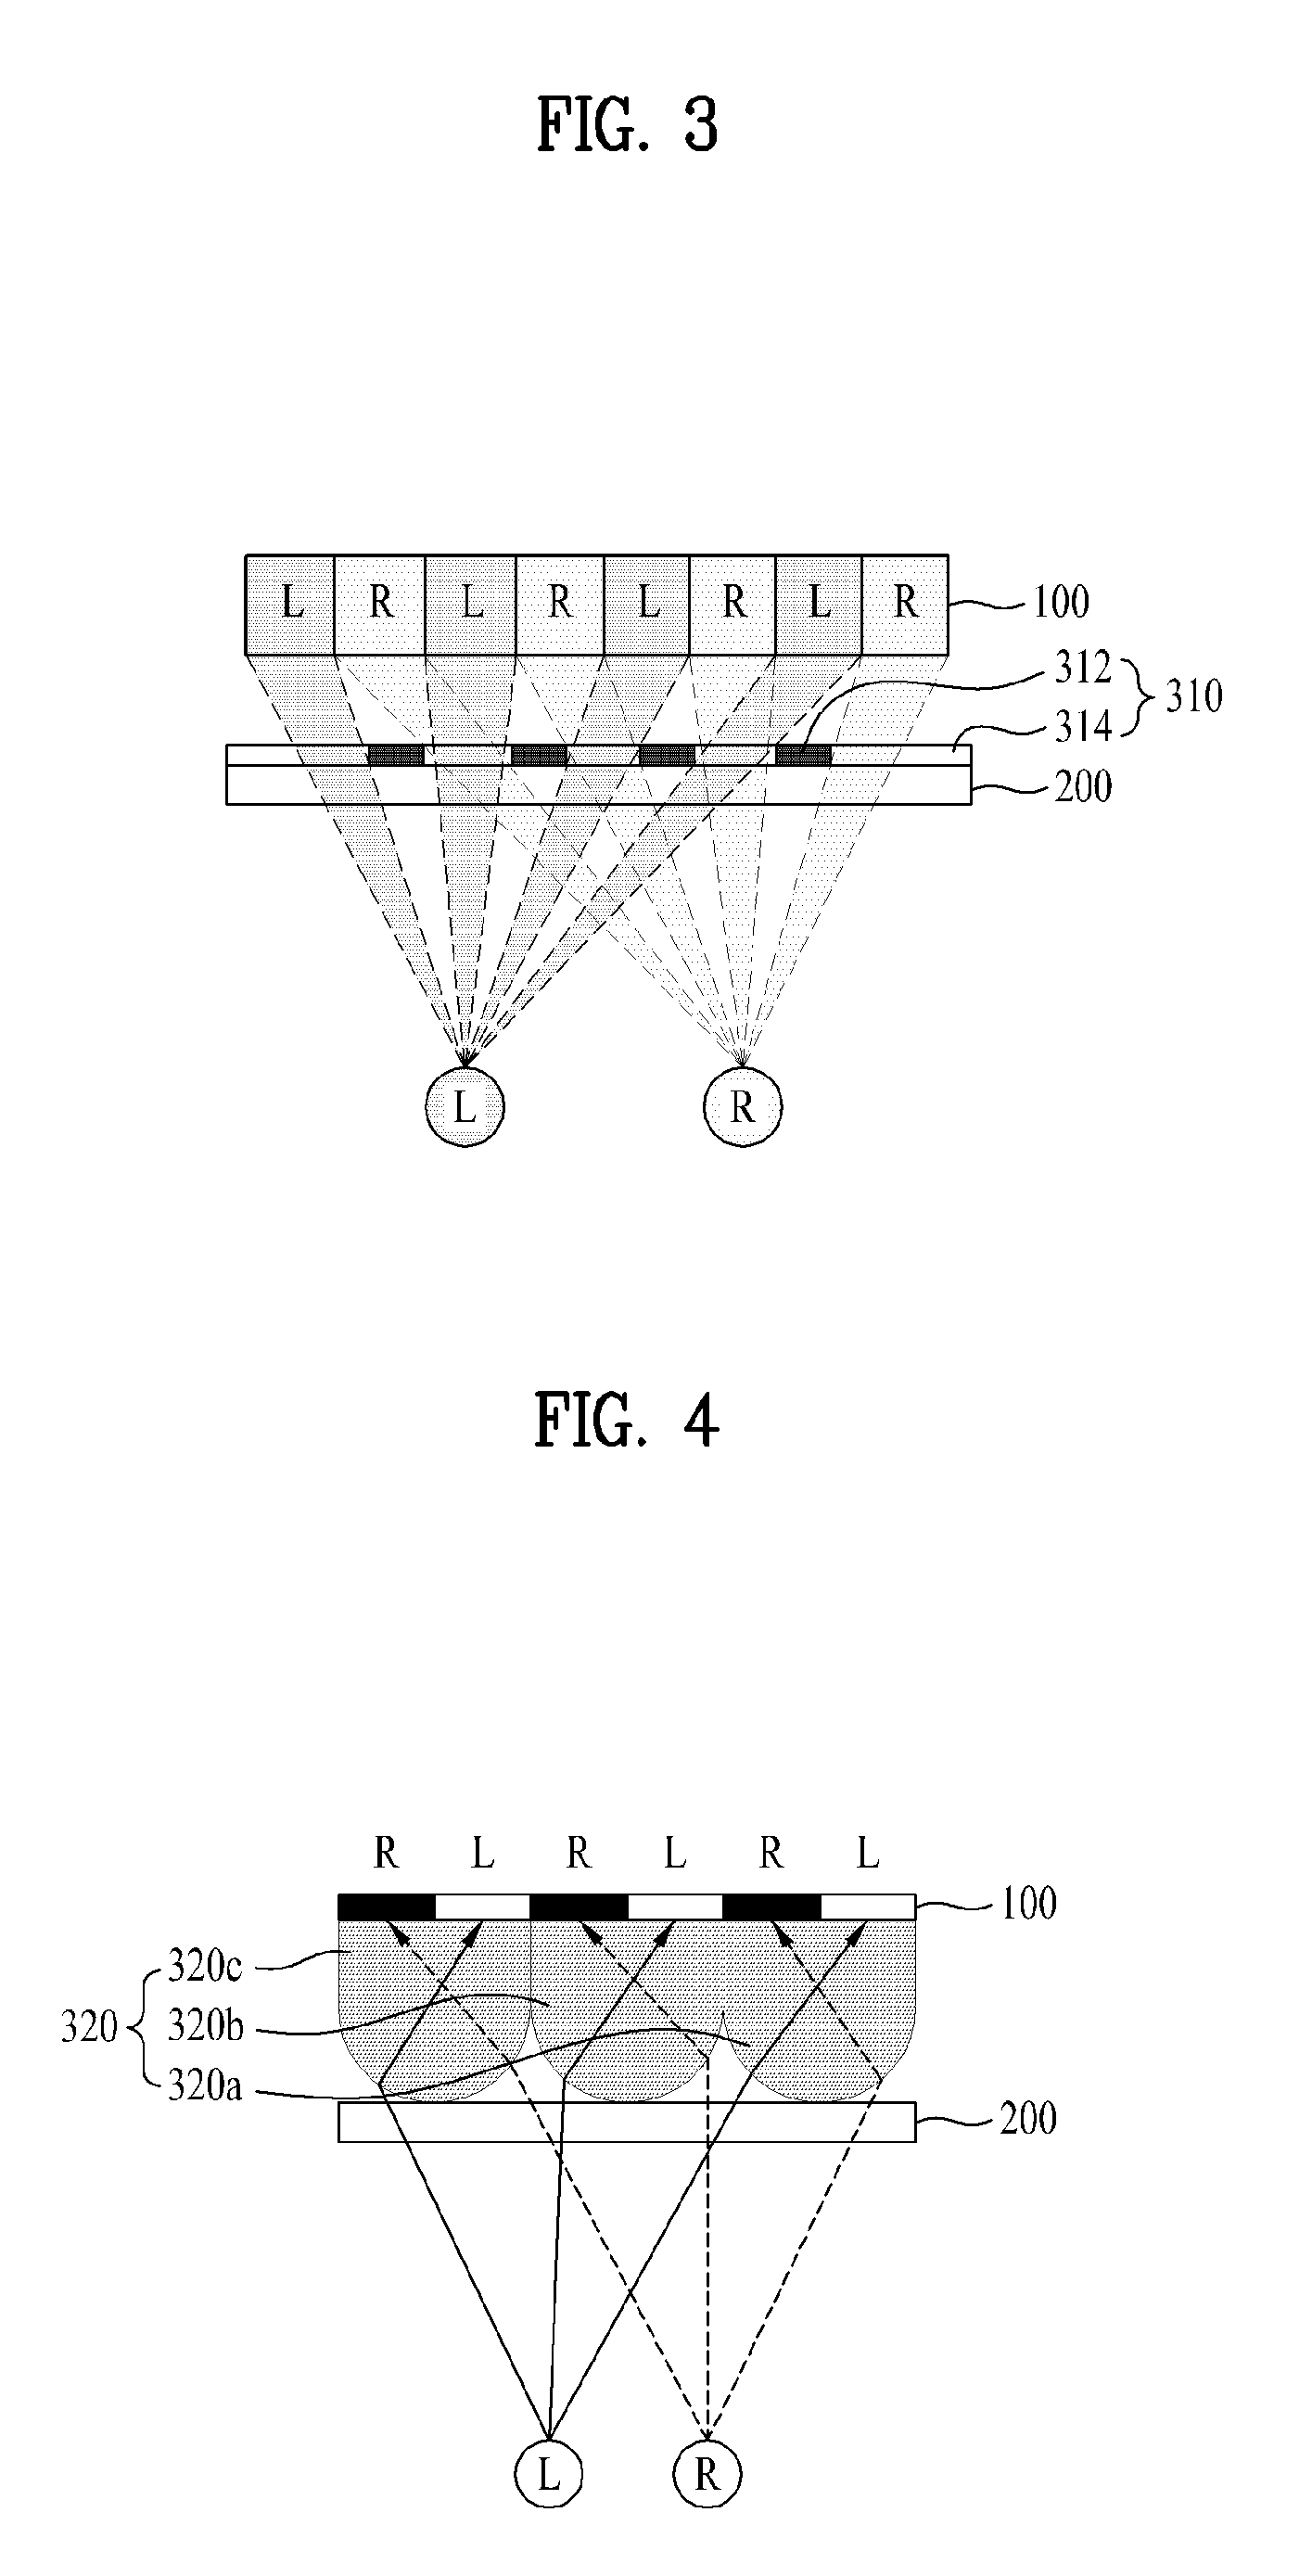 Display apparatus and method of adjusting 3D image therein